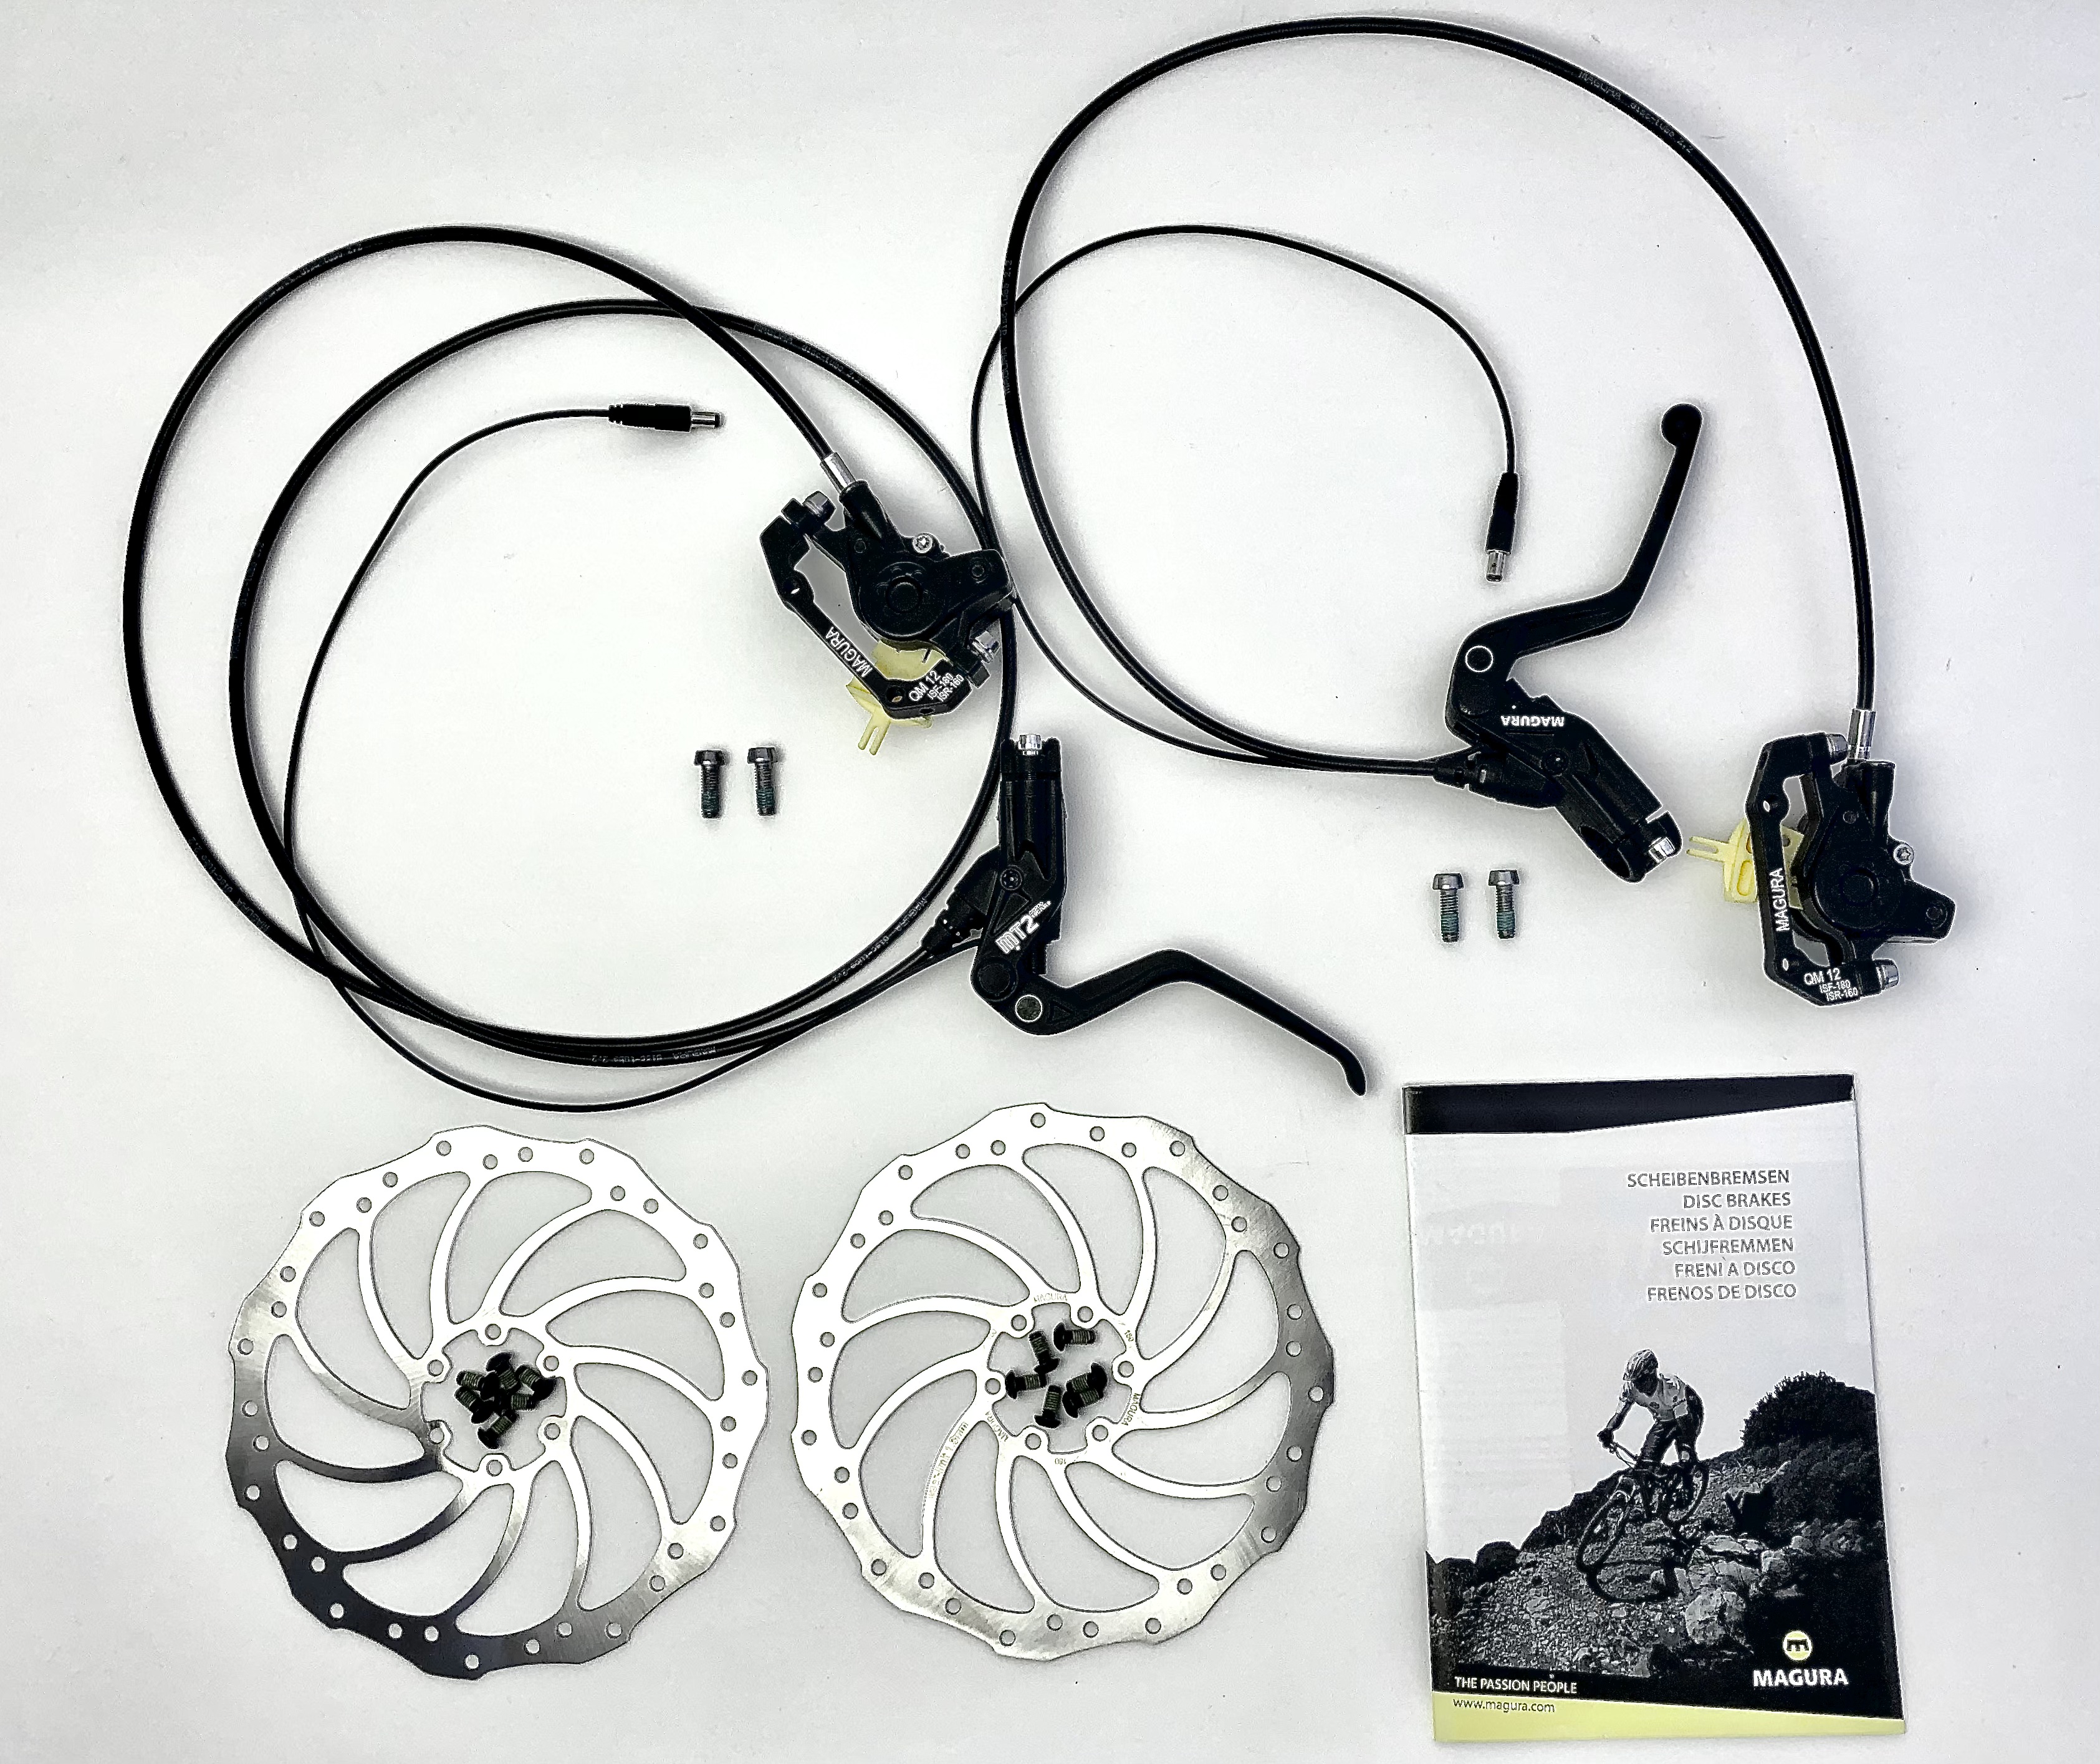 Magura MT2 hydraulic disc brake set front and rear